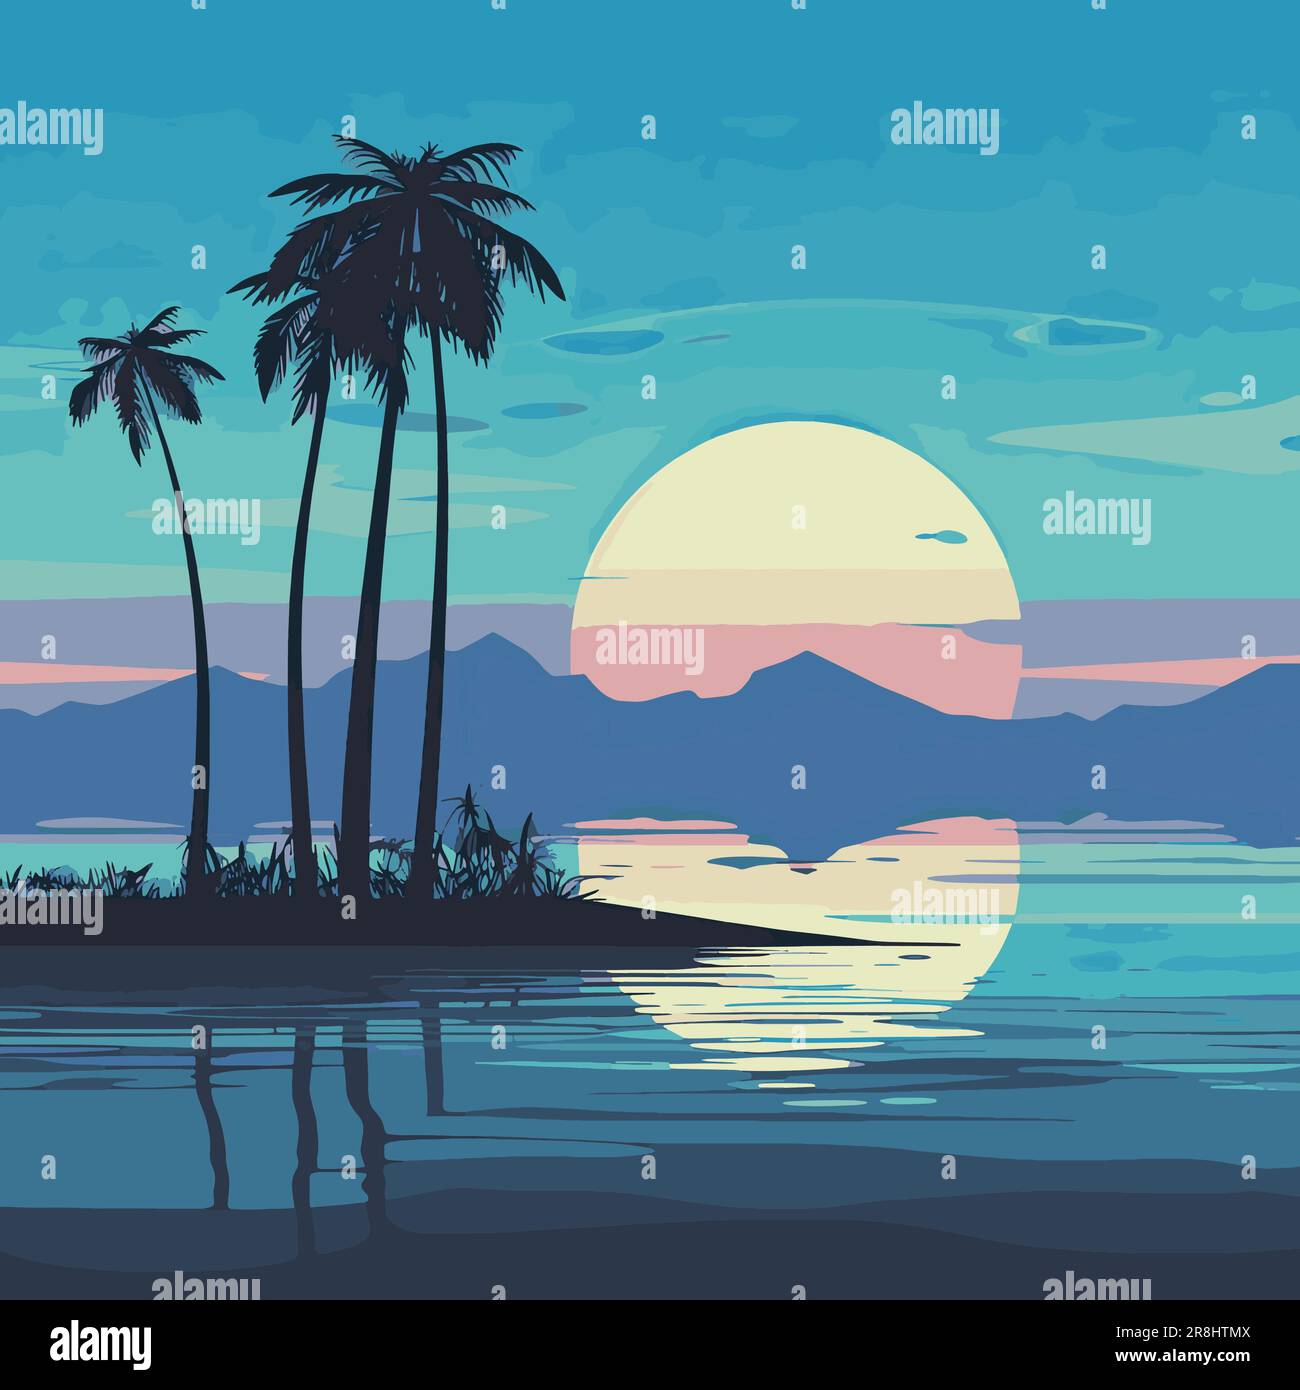 Vector illustration with a simple beautiful seascape with palms, beach and ocean in the background Stock Vector